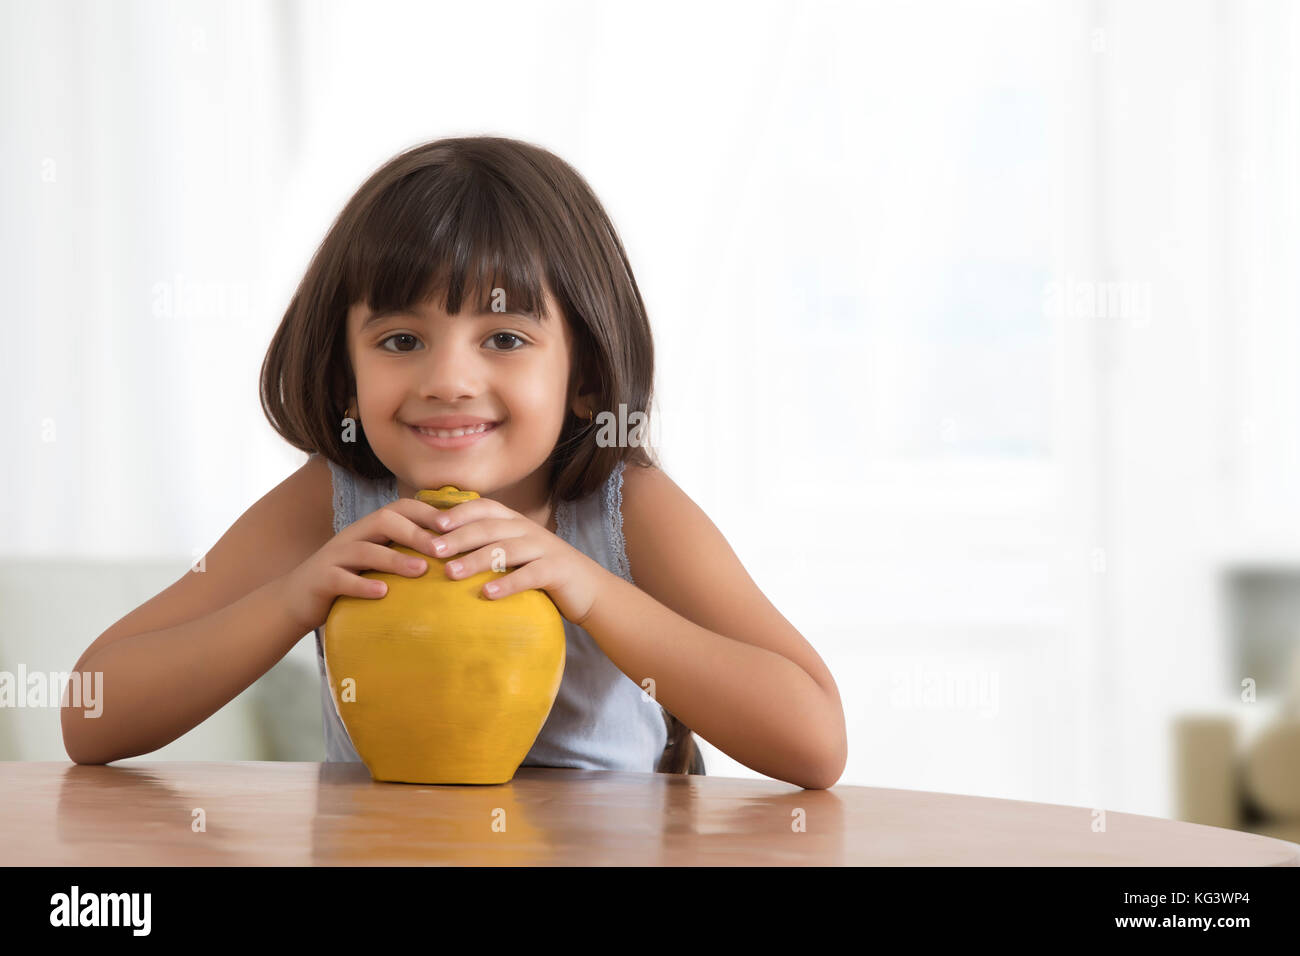 Portrait of smiling little girl holding clay piggy bank Stock Photo